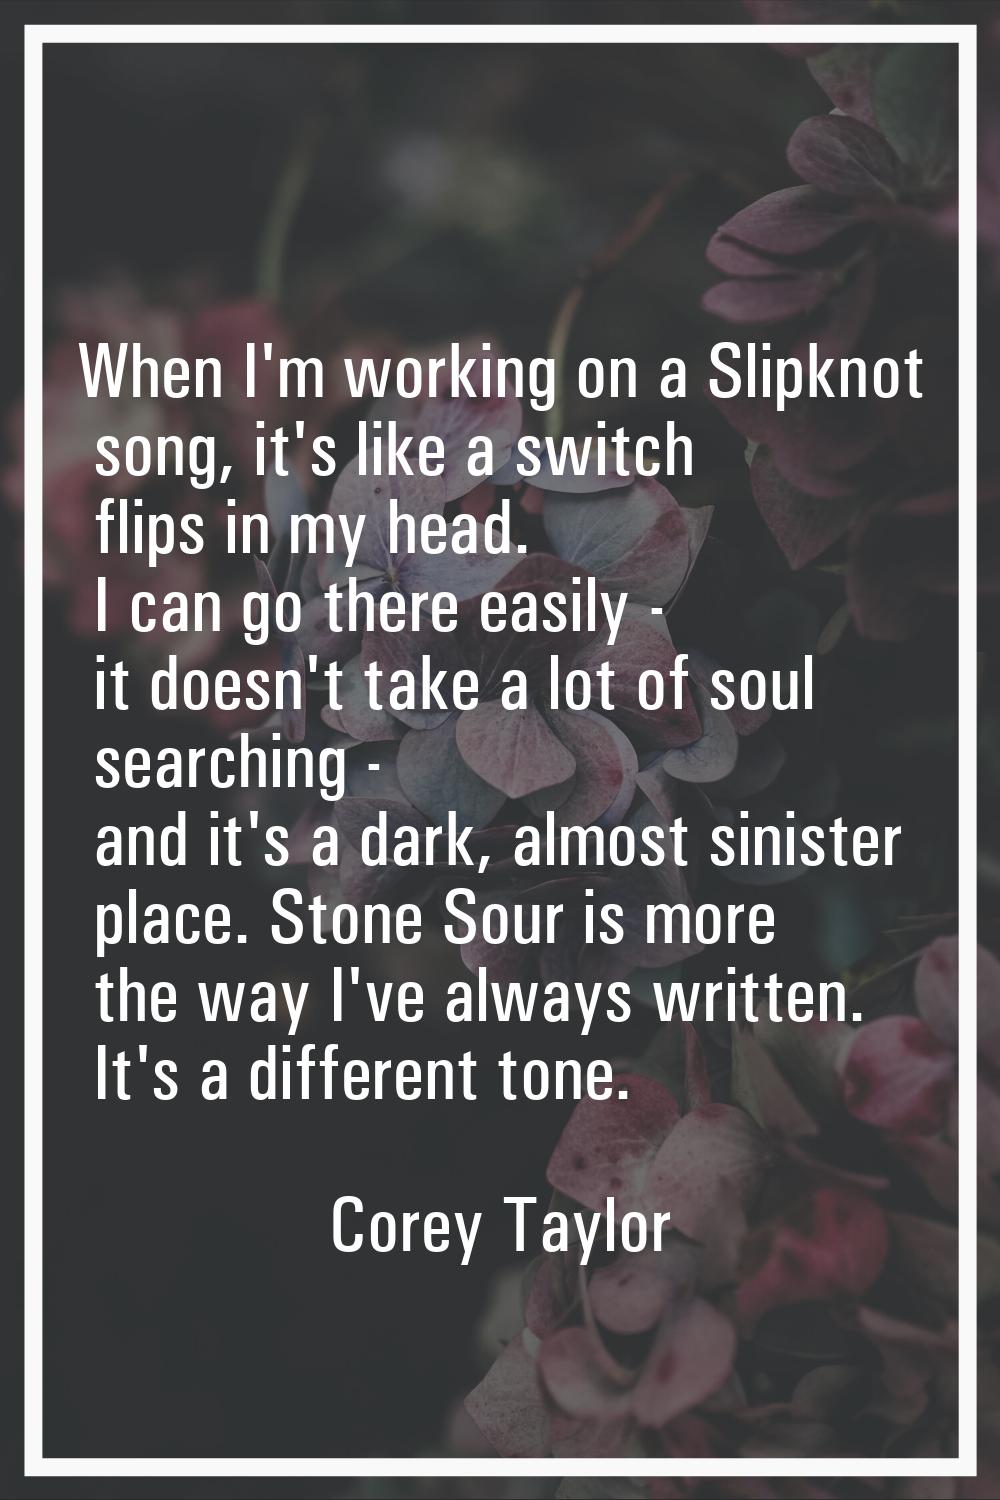 When I'm working on a Slipknot song, it's like a switch flips in my head. I can go there easily - i